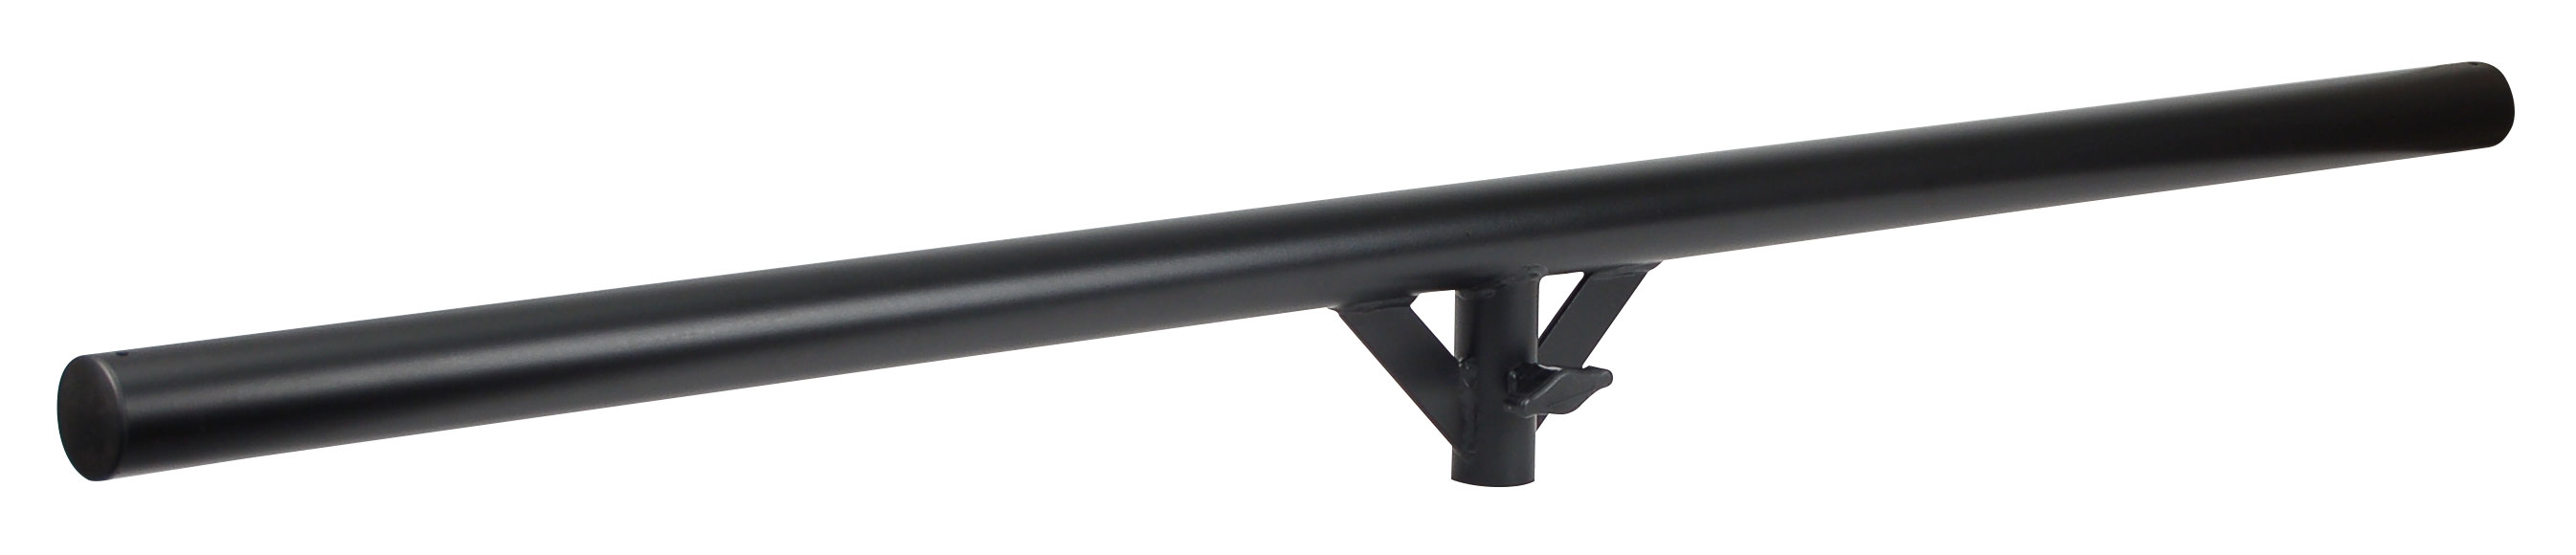 T-Bar for 35mm stand - 50mm round section - Length 1.5m